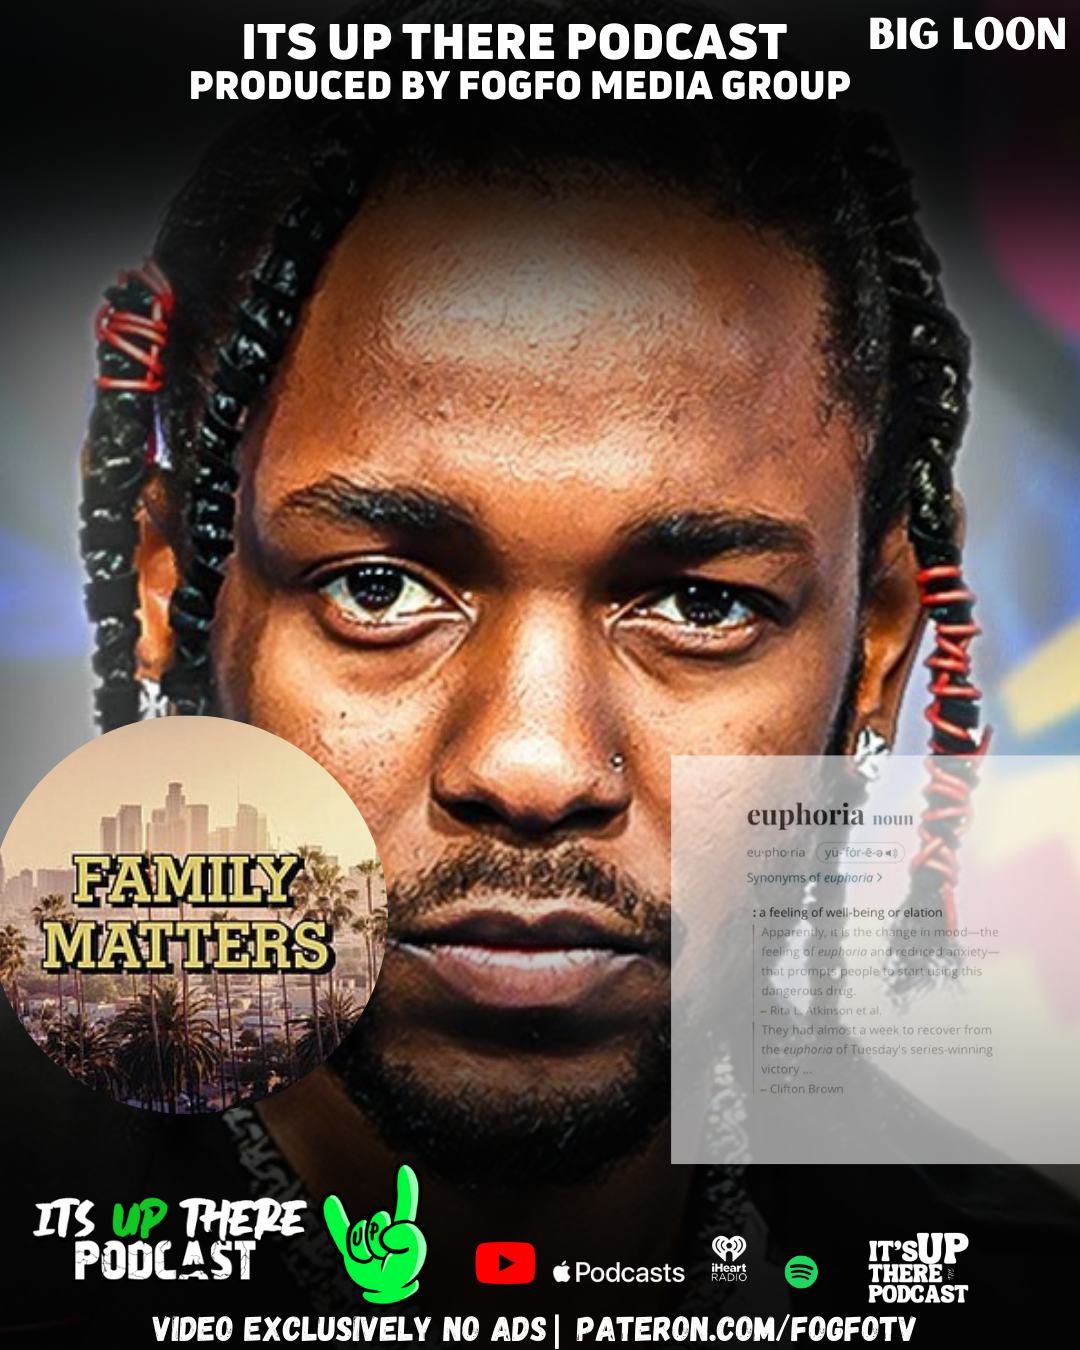 "Easter Egg Hunt" Loon Reacts to Drake's 'Family Matters' Diss & Kendrick Lamar's 'Euphoria' | It's Up There Podcast